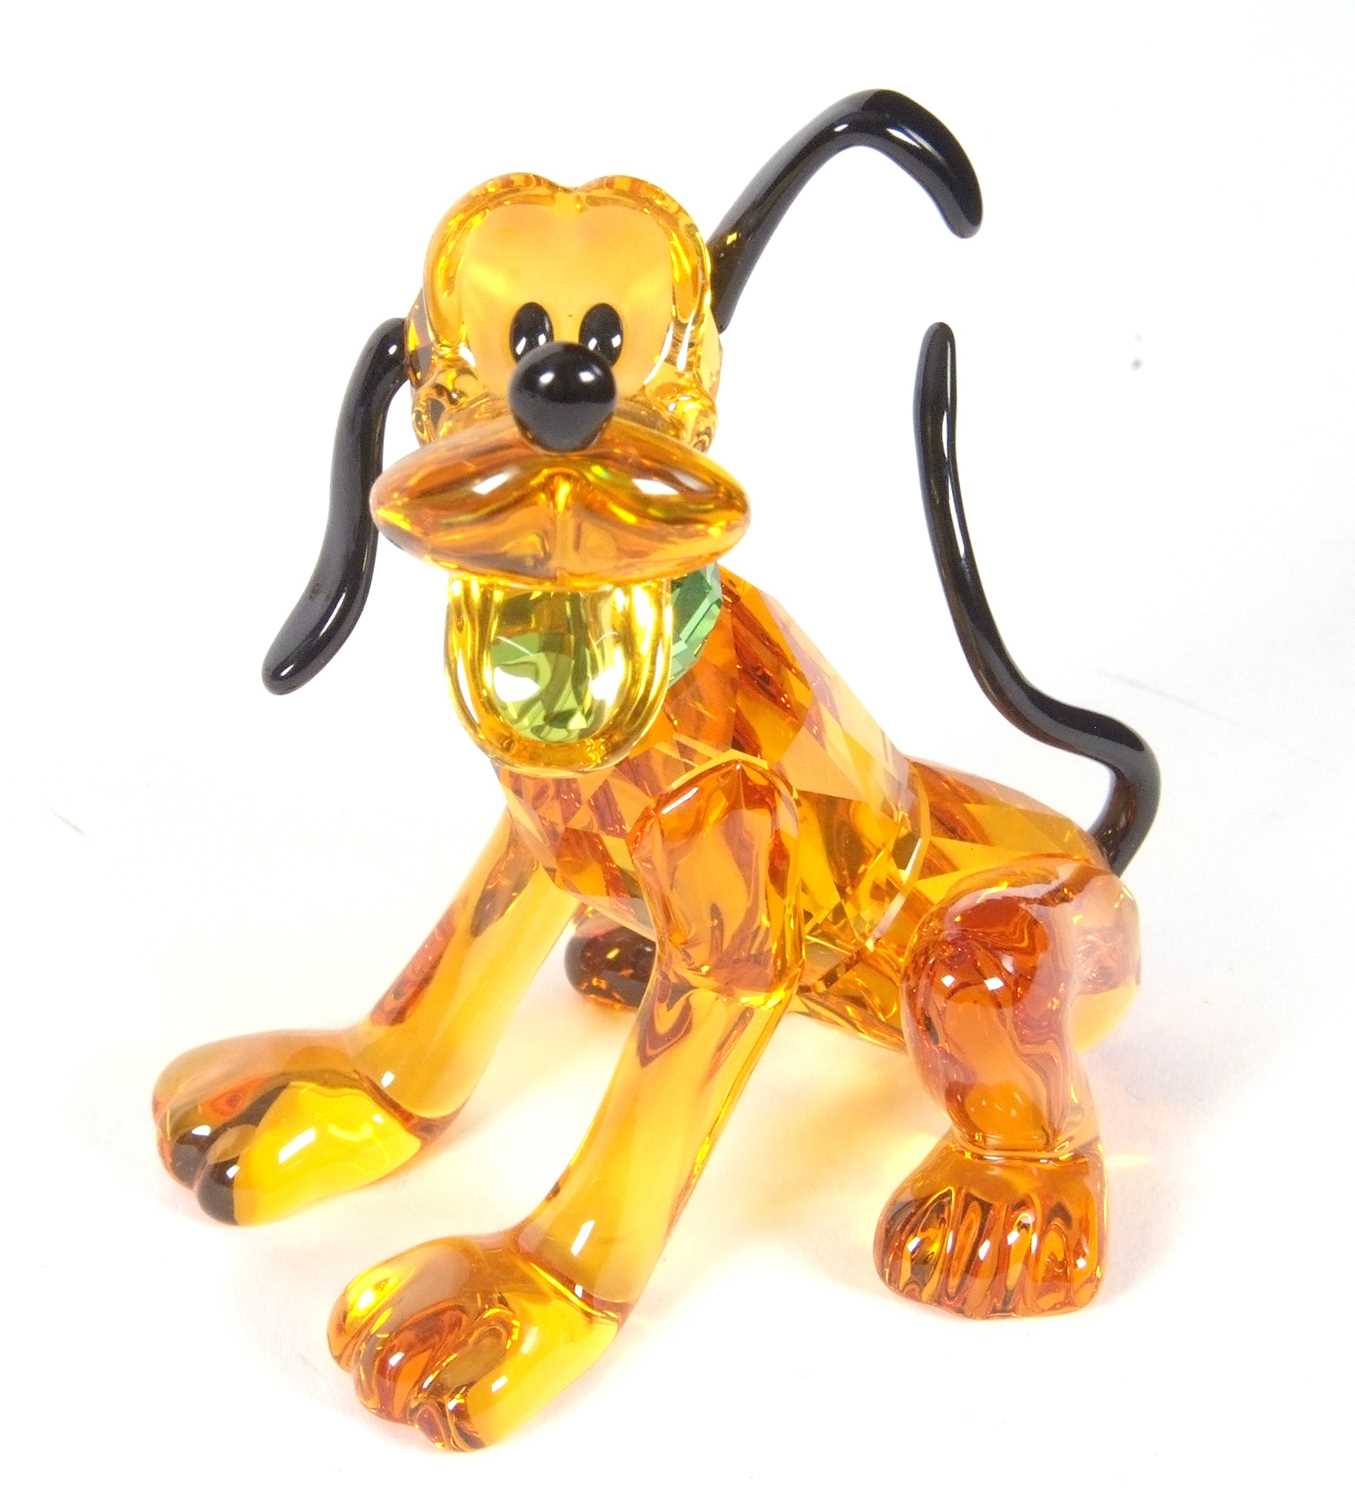 A Swarovski Disney figure of Pluto with yellow colour, black ears and tail, with original box, 9cm - Image 16 of 16